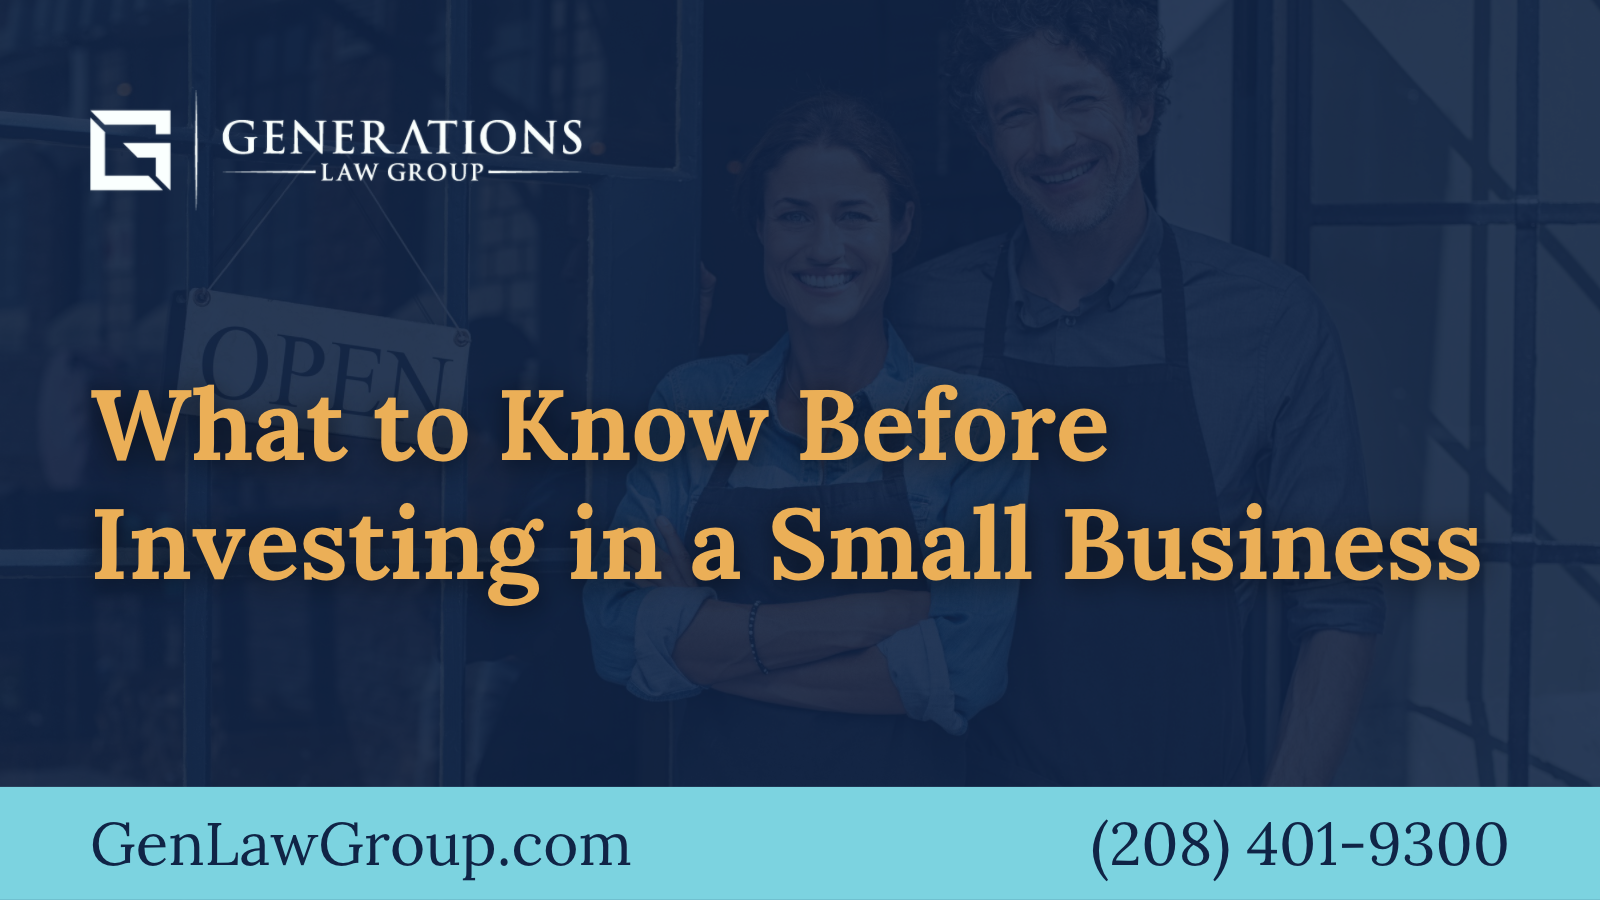 What to Know Before Investing in a Small Business